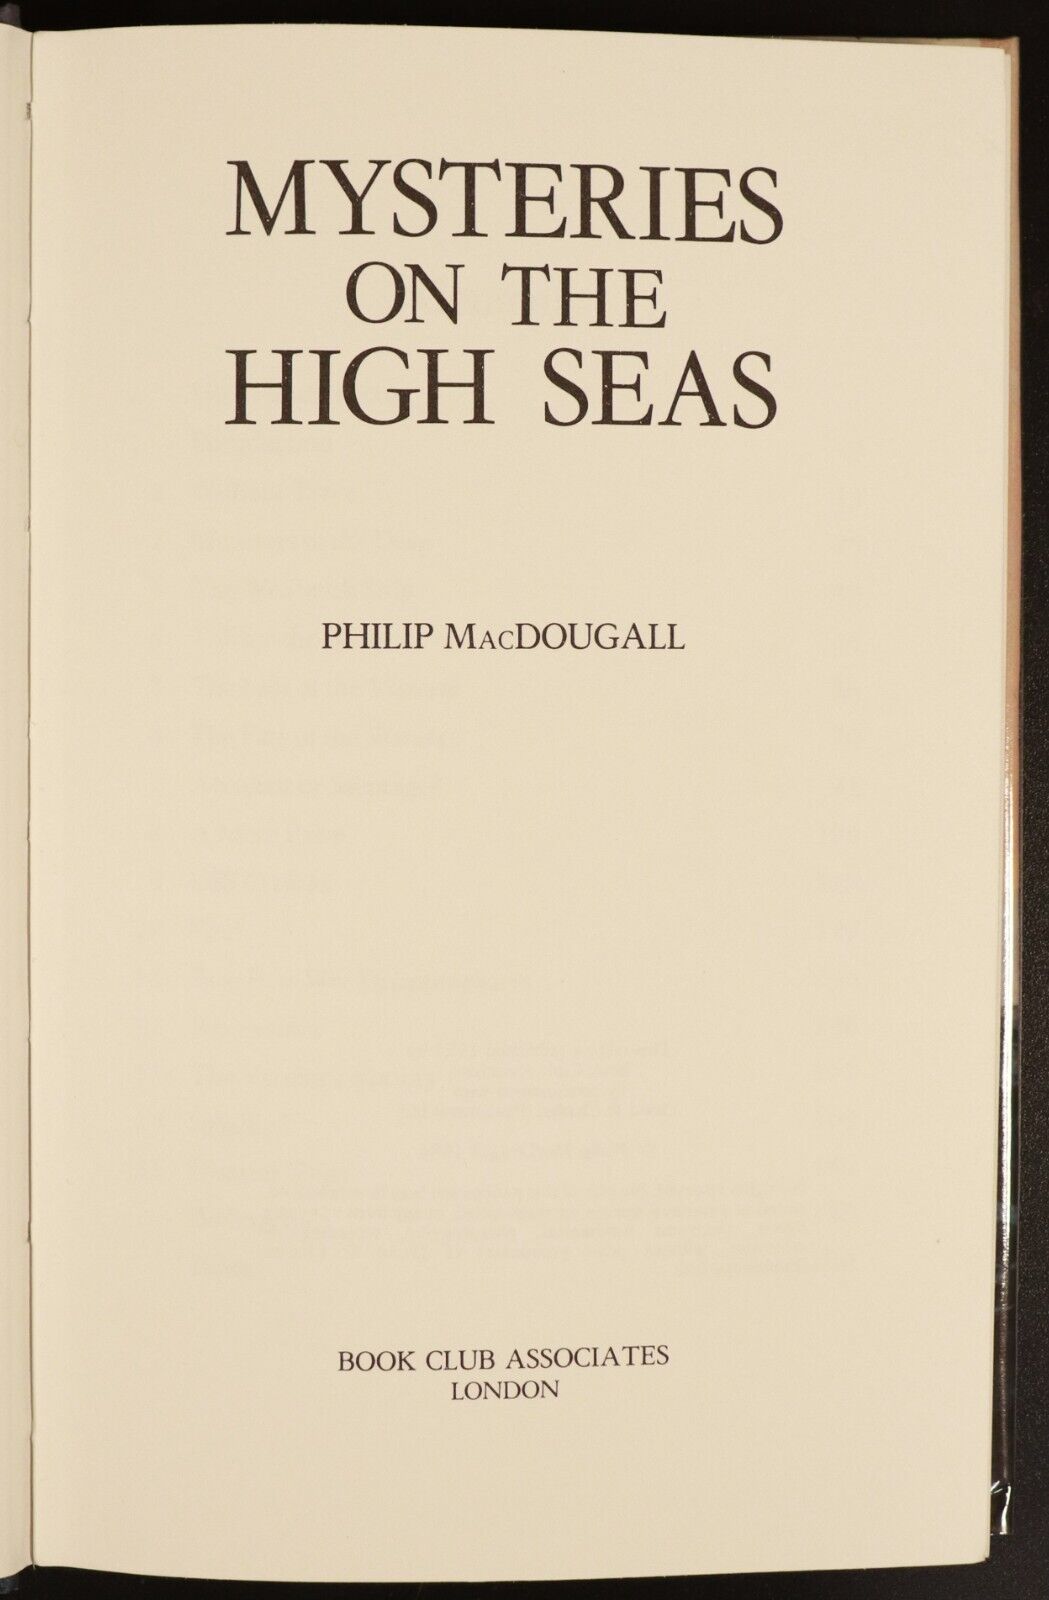 1984 Mysteries On The High Seas by P. MacDougall 1st Ed. Maritime History Book - 0